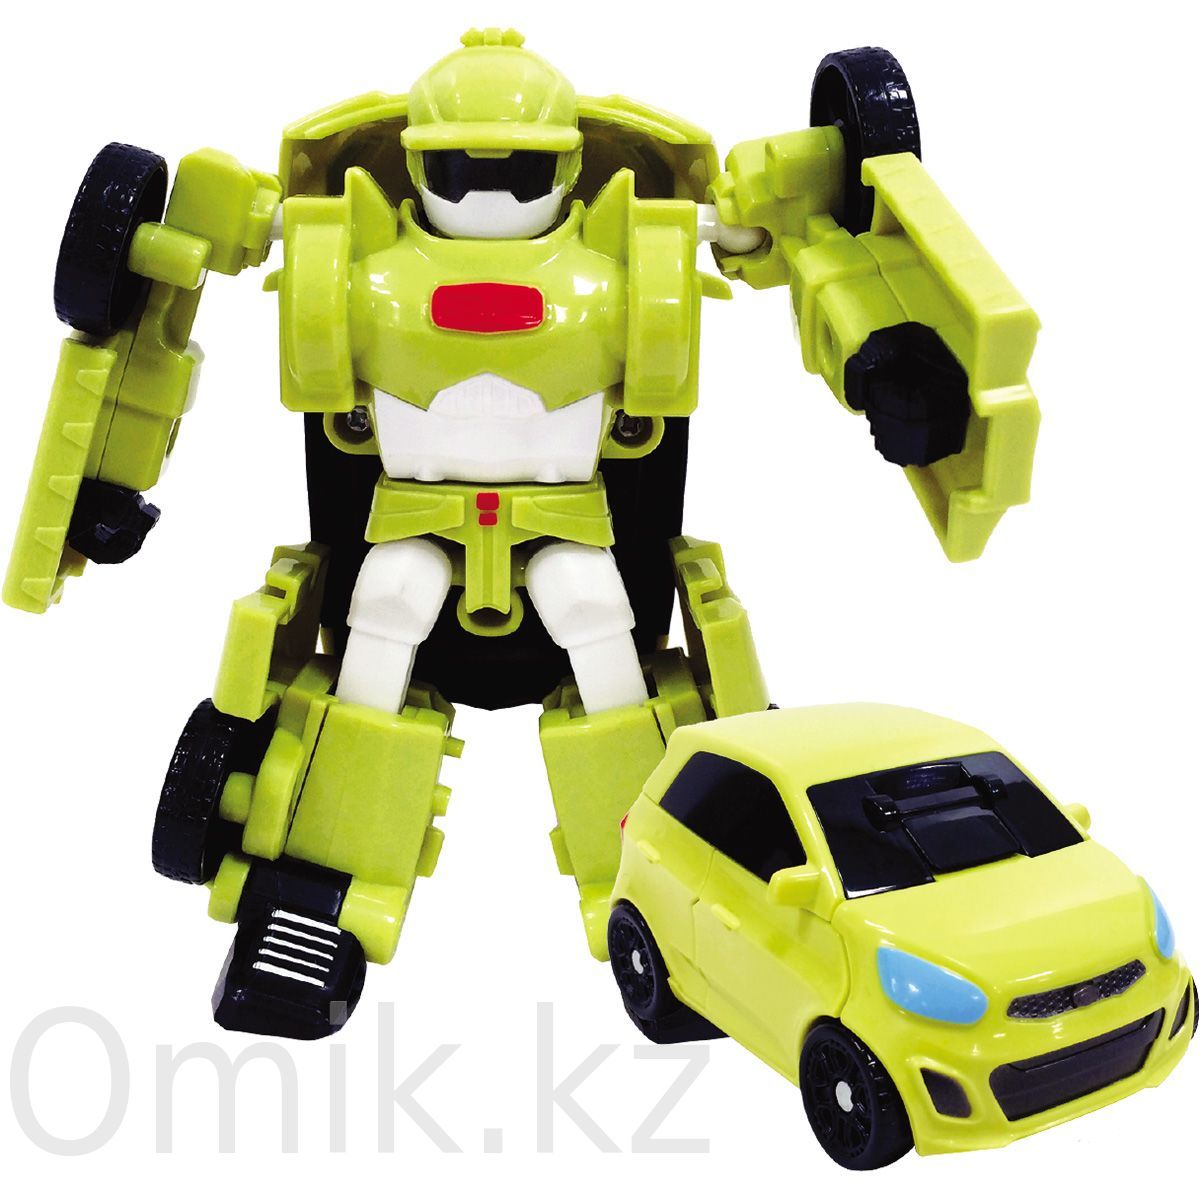 D toys. Трансформер young Toys Tobot Mini d 301027. 301015 Тобот d. Трансформер young Toys Tobot Mini. Трансформер young Toys Tobot Mini Athlon Rocky 301071.